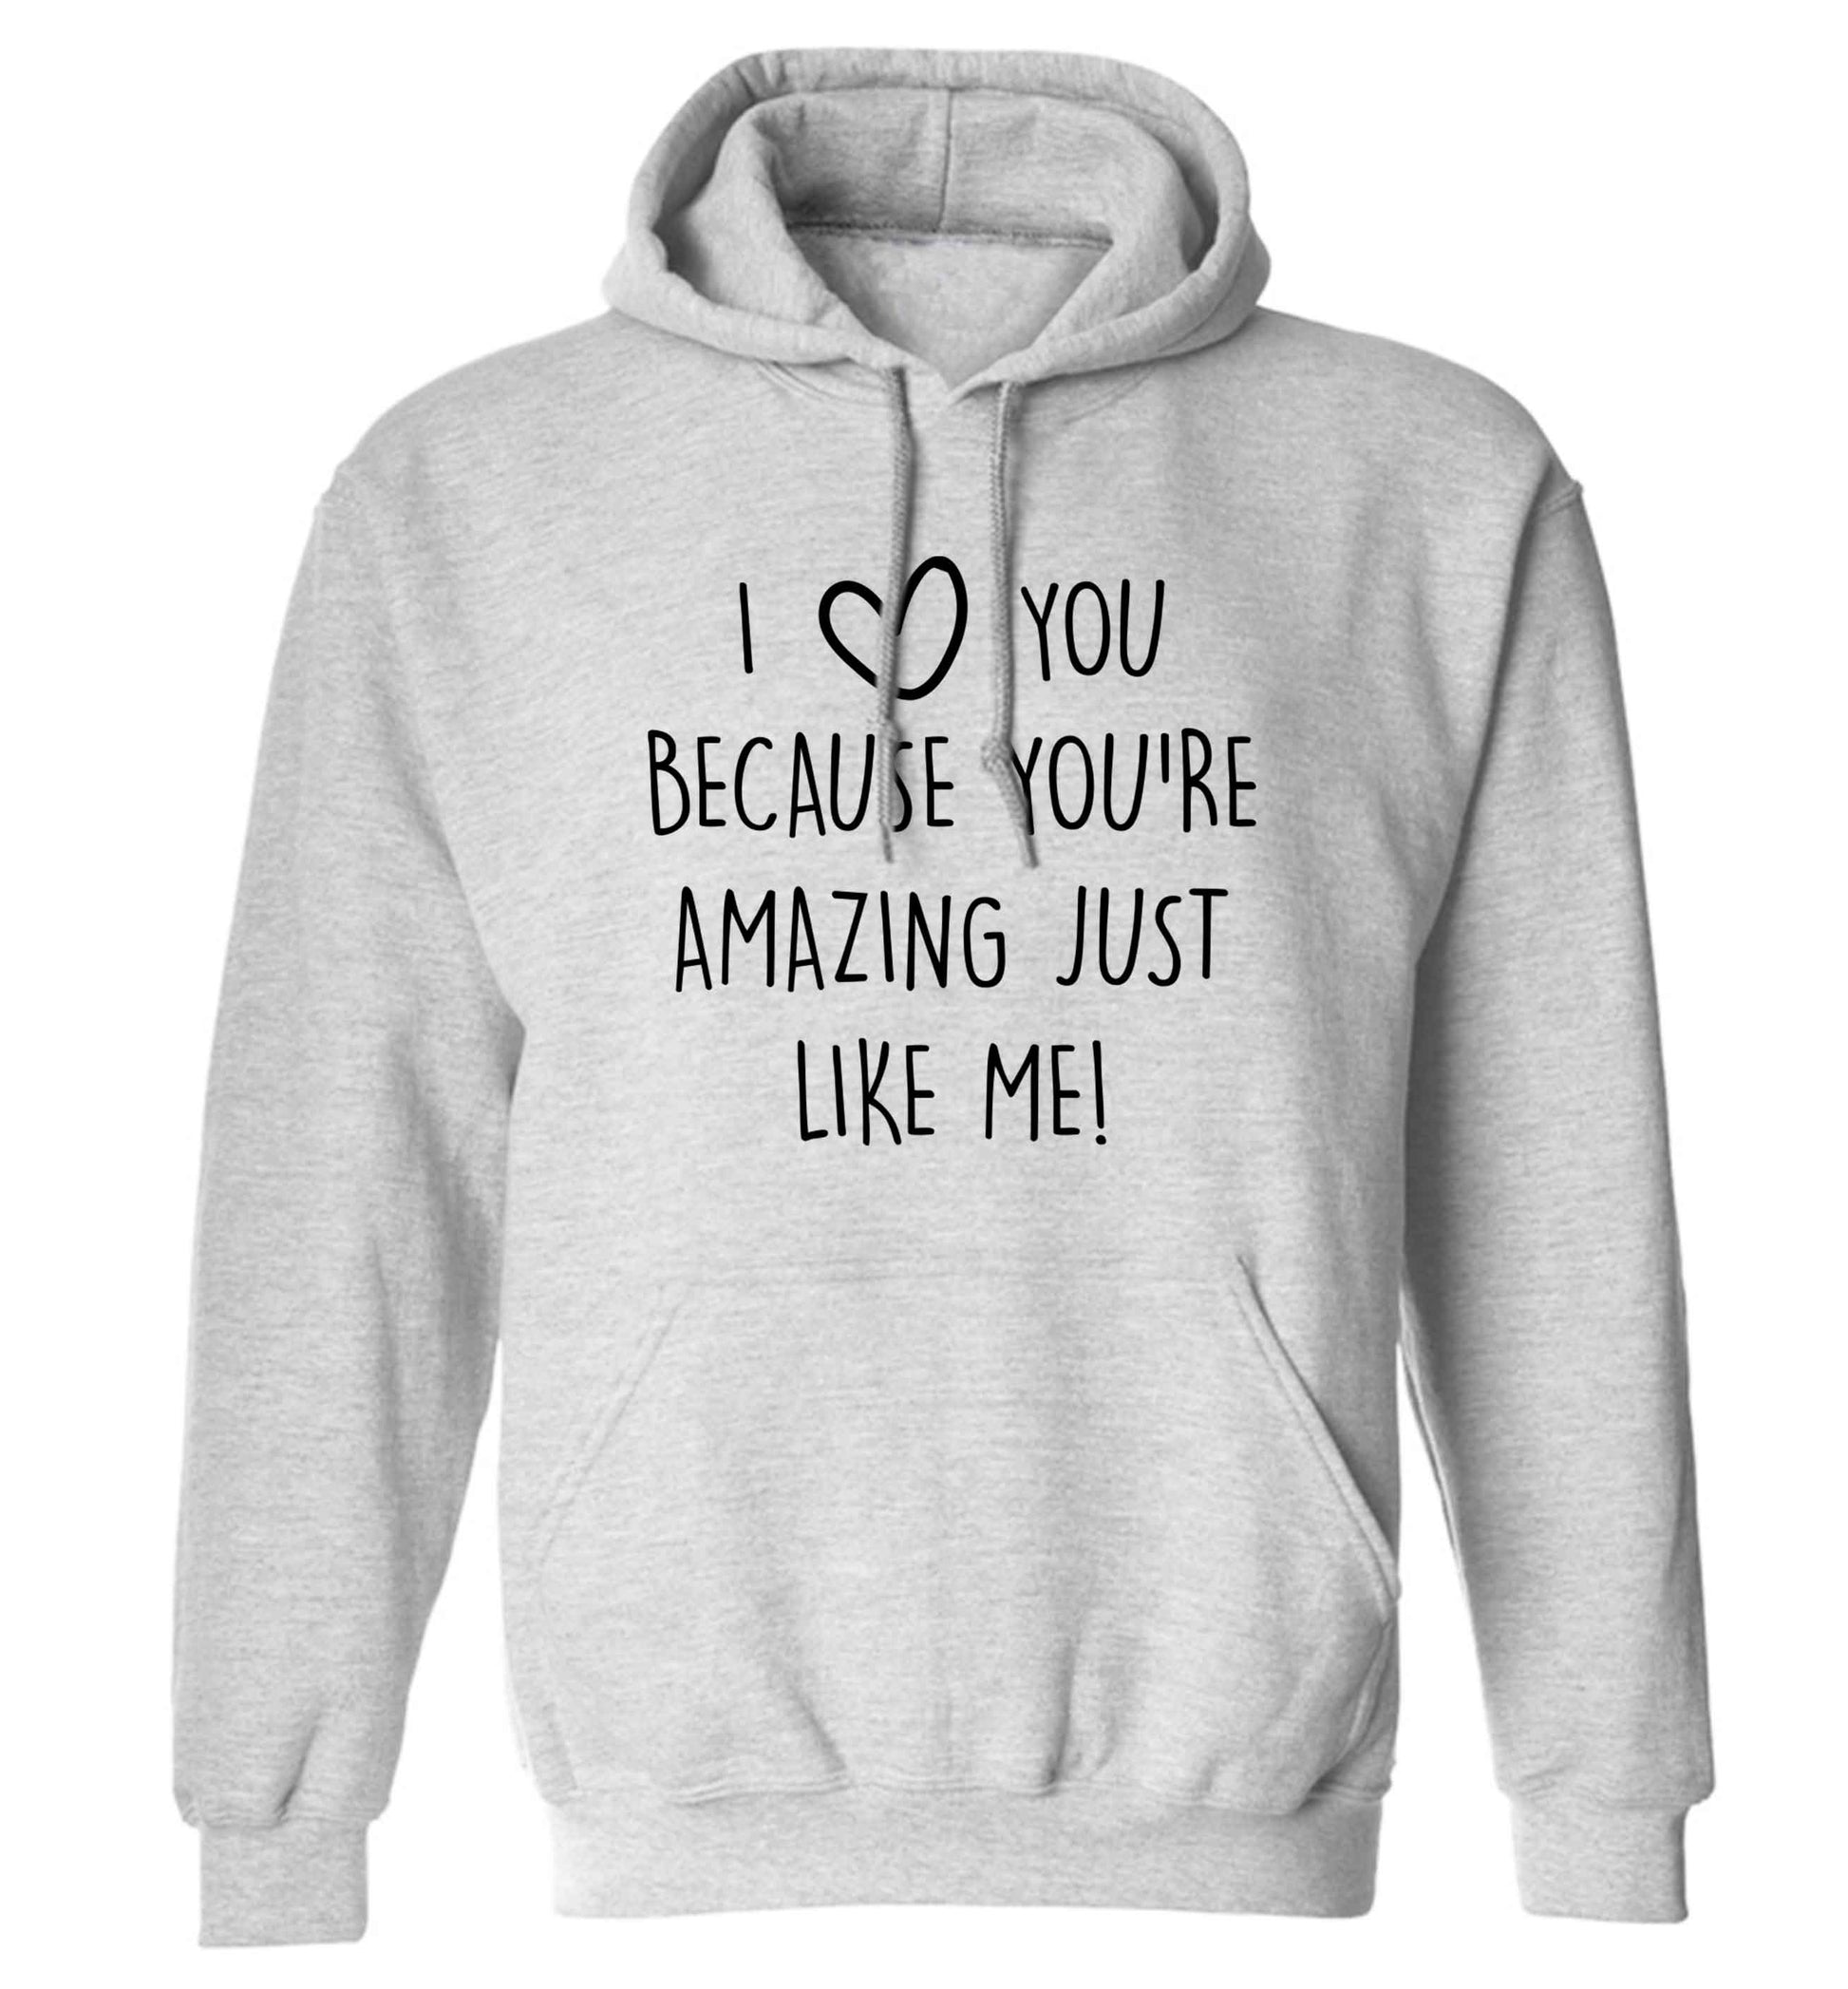 I love you because you're amazing just like me adults unisex grey hoodie 2XL